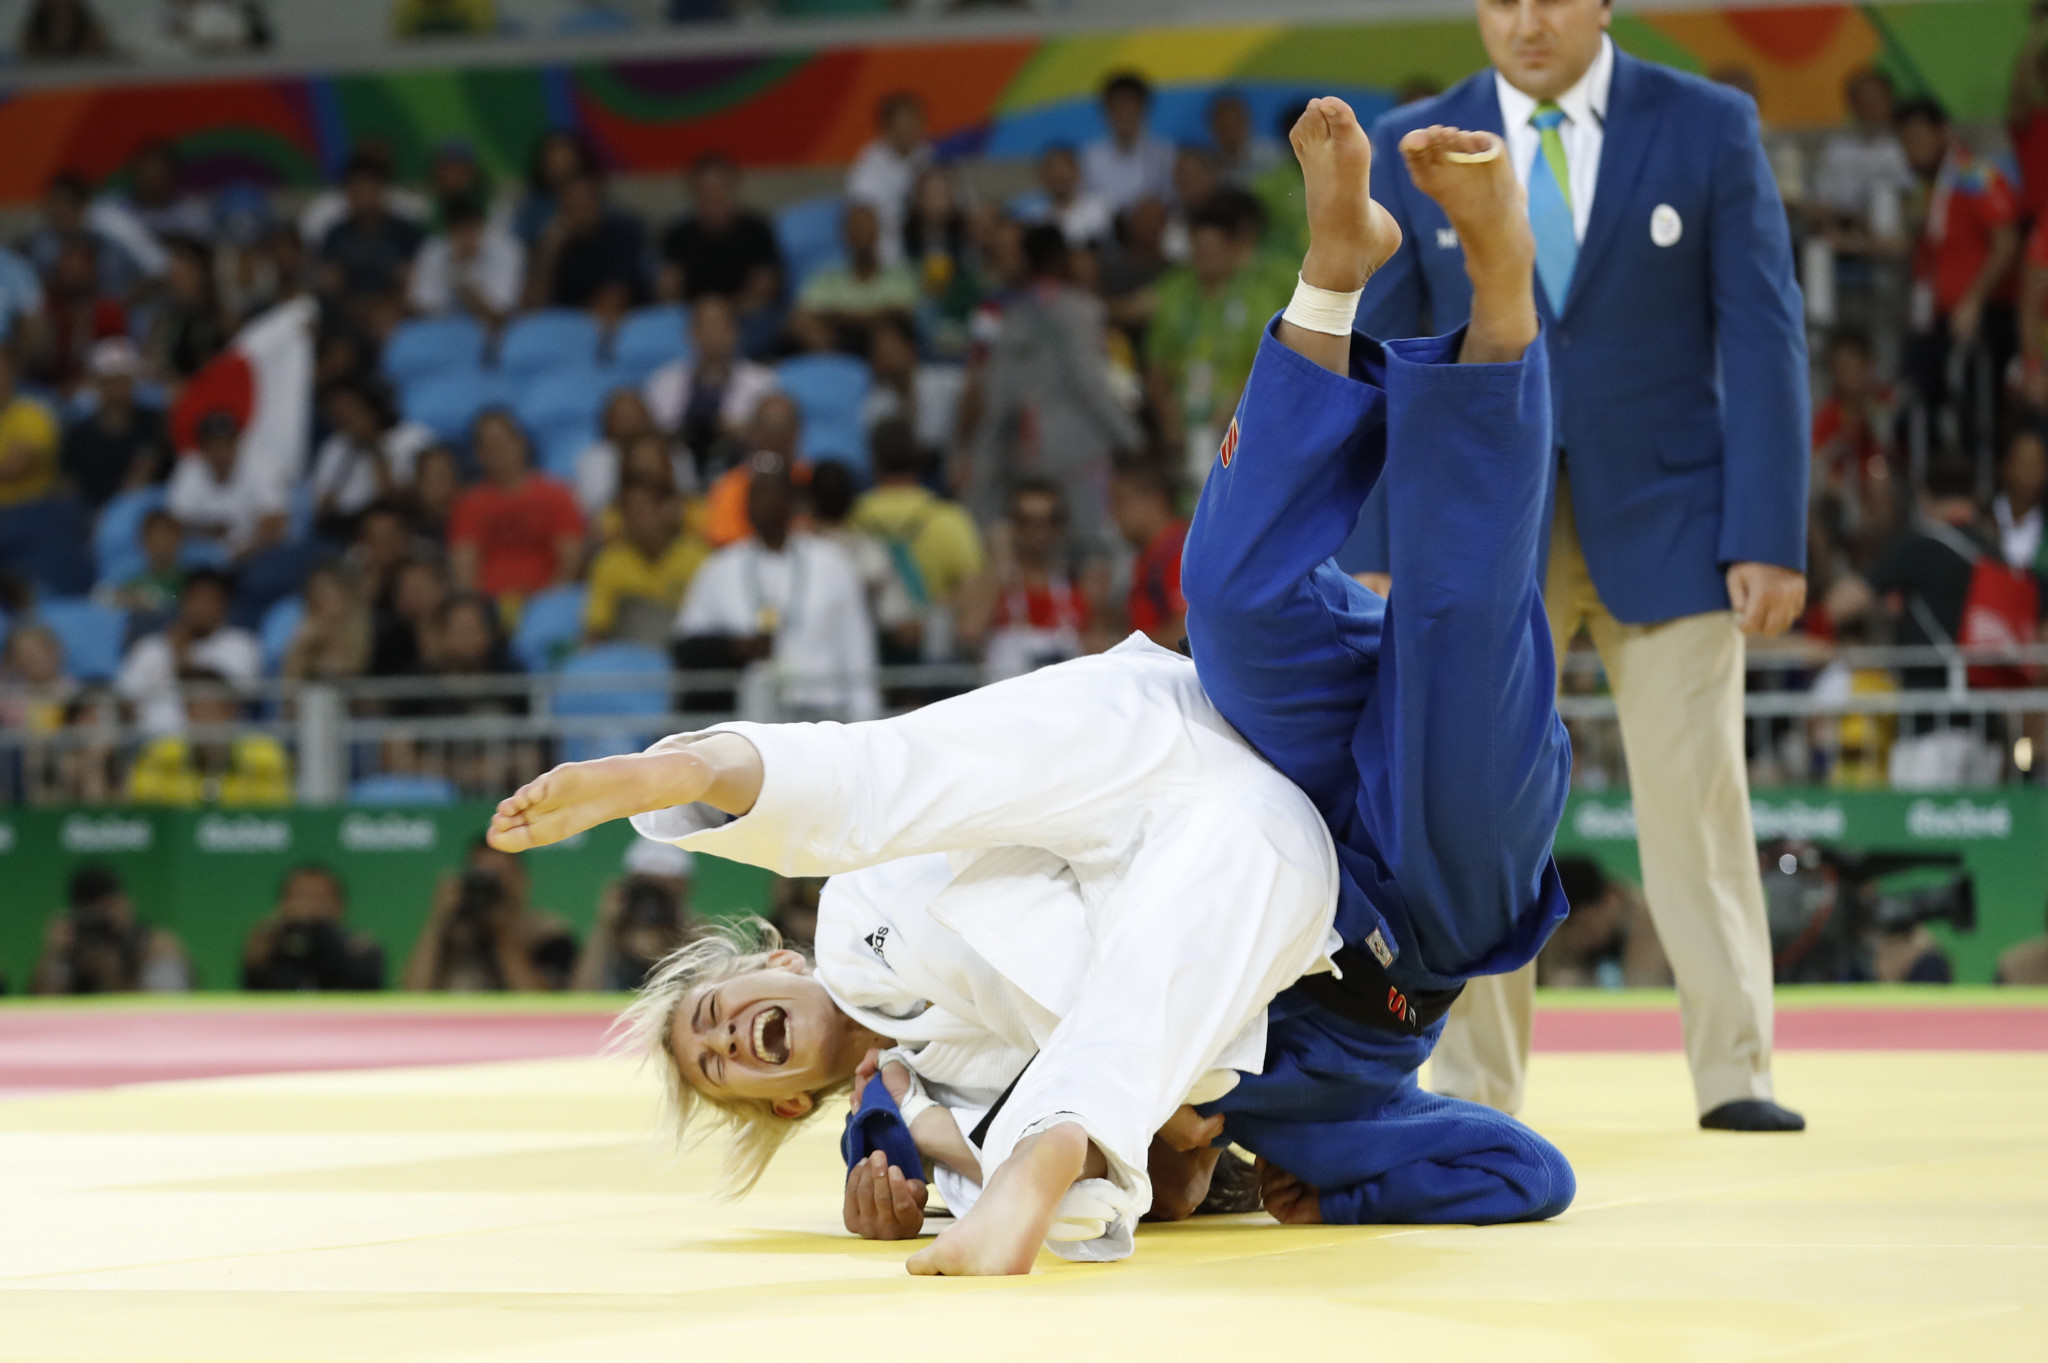 Hungary's Eva Csernoviczki, in white, won a silver medal at the recent World Judo Masters in Saint Petersburg ©Getty Images